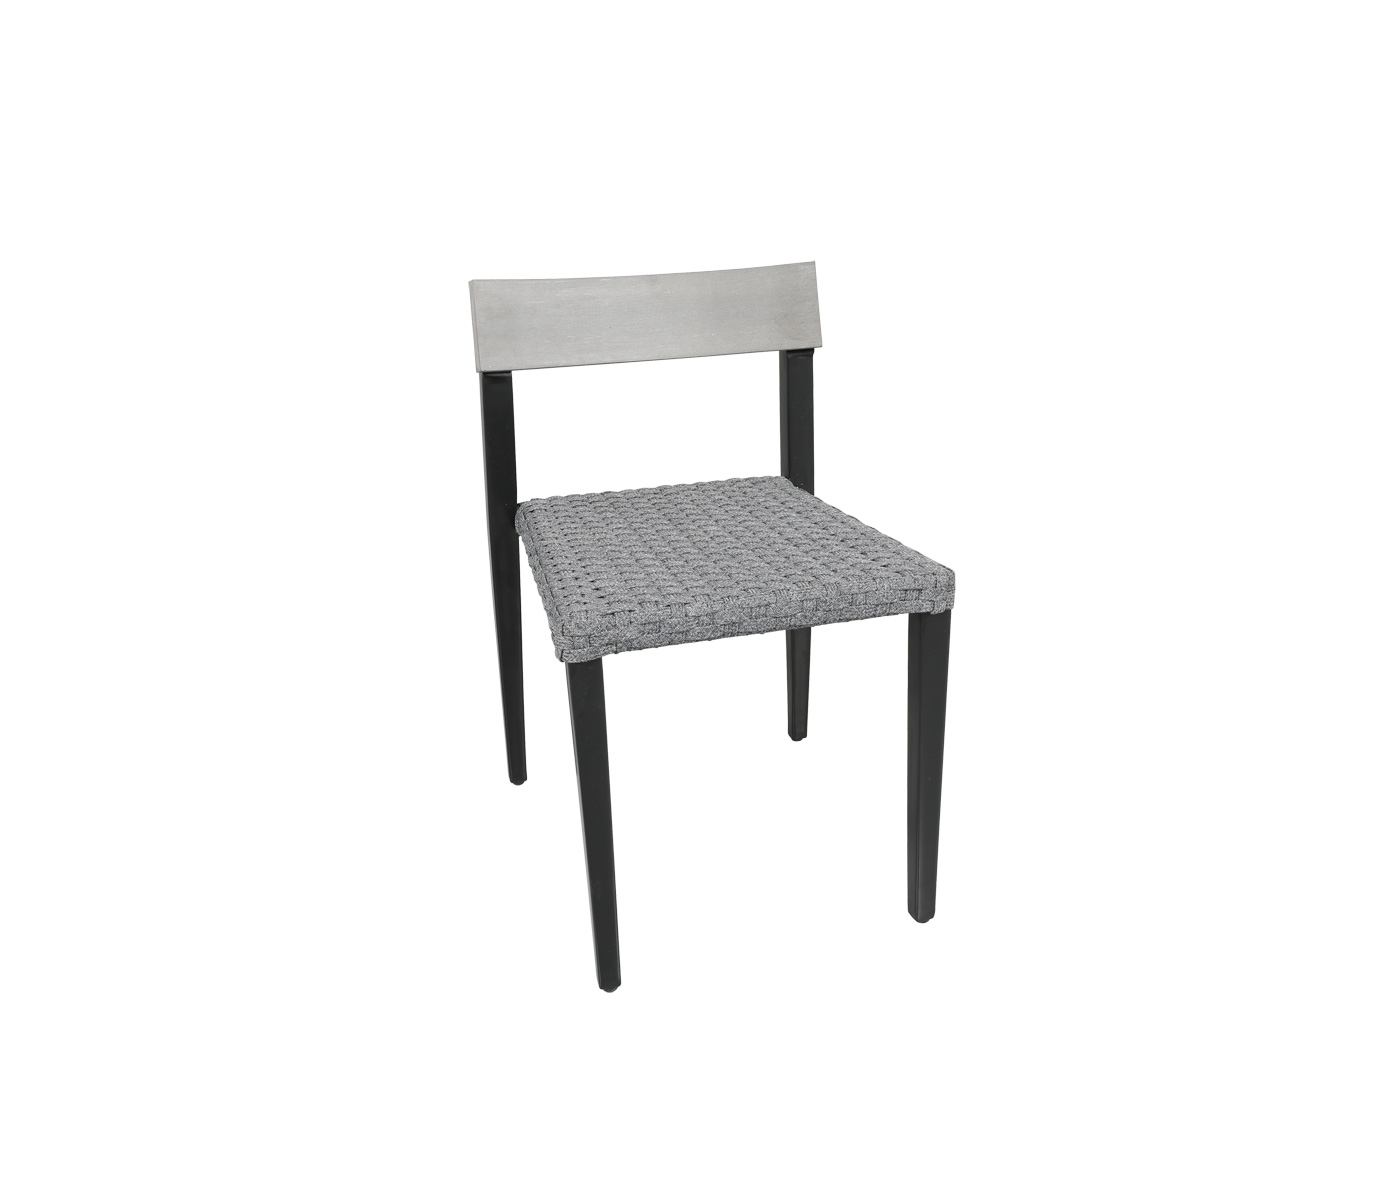 Shop Patio Furniture by Details | CabanaCoast Store Locator: Greater